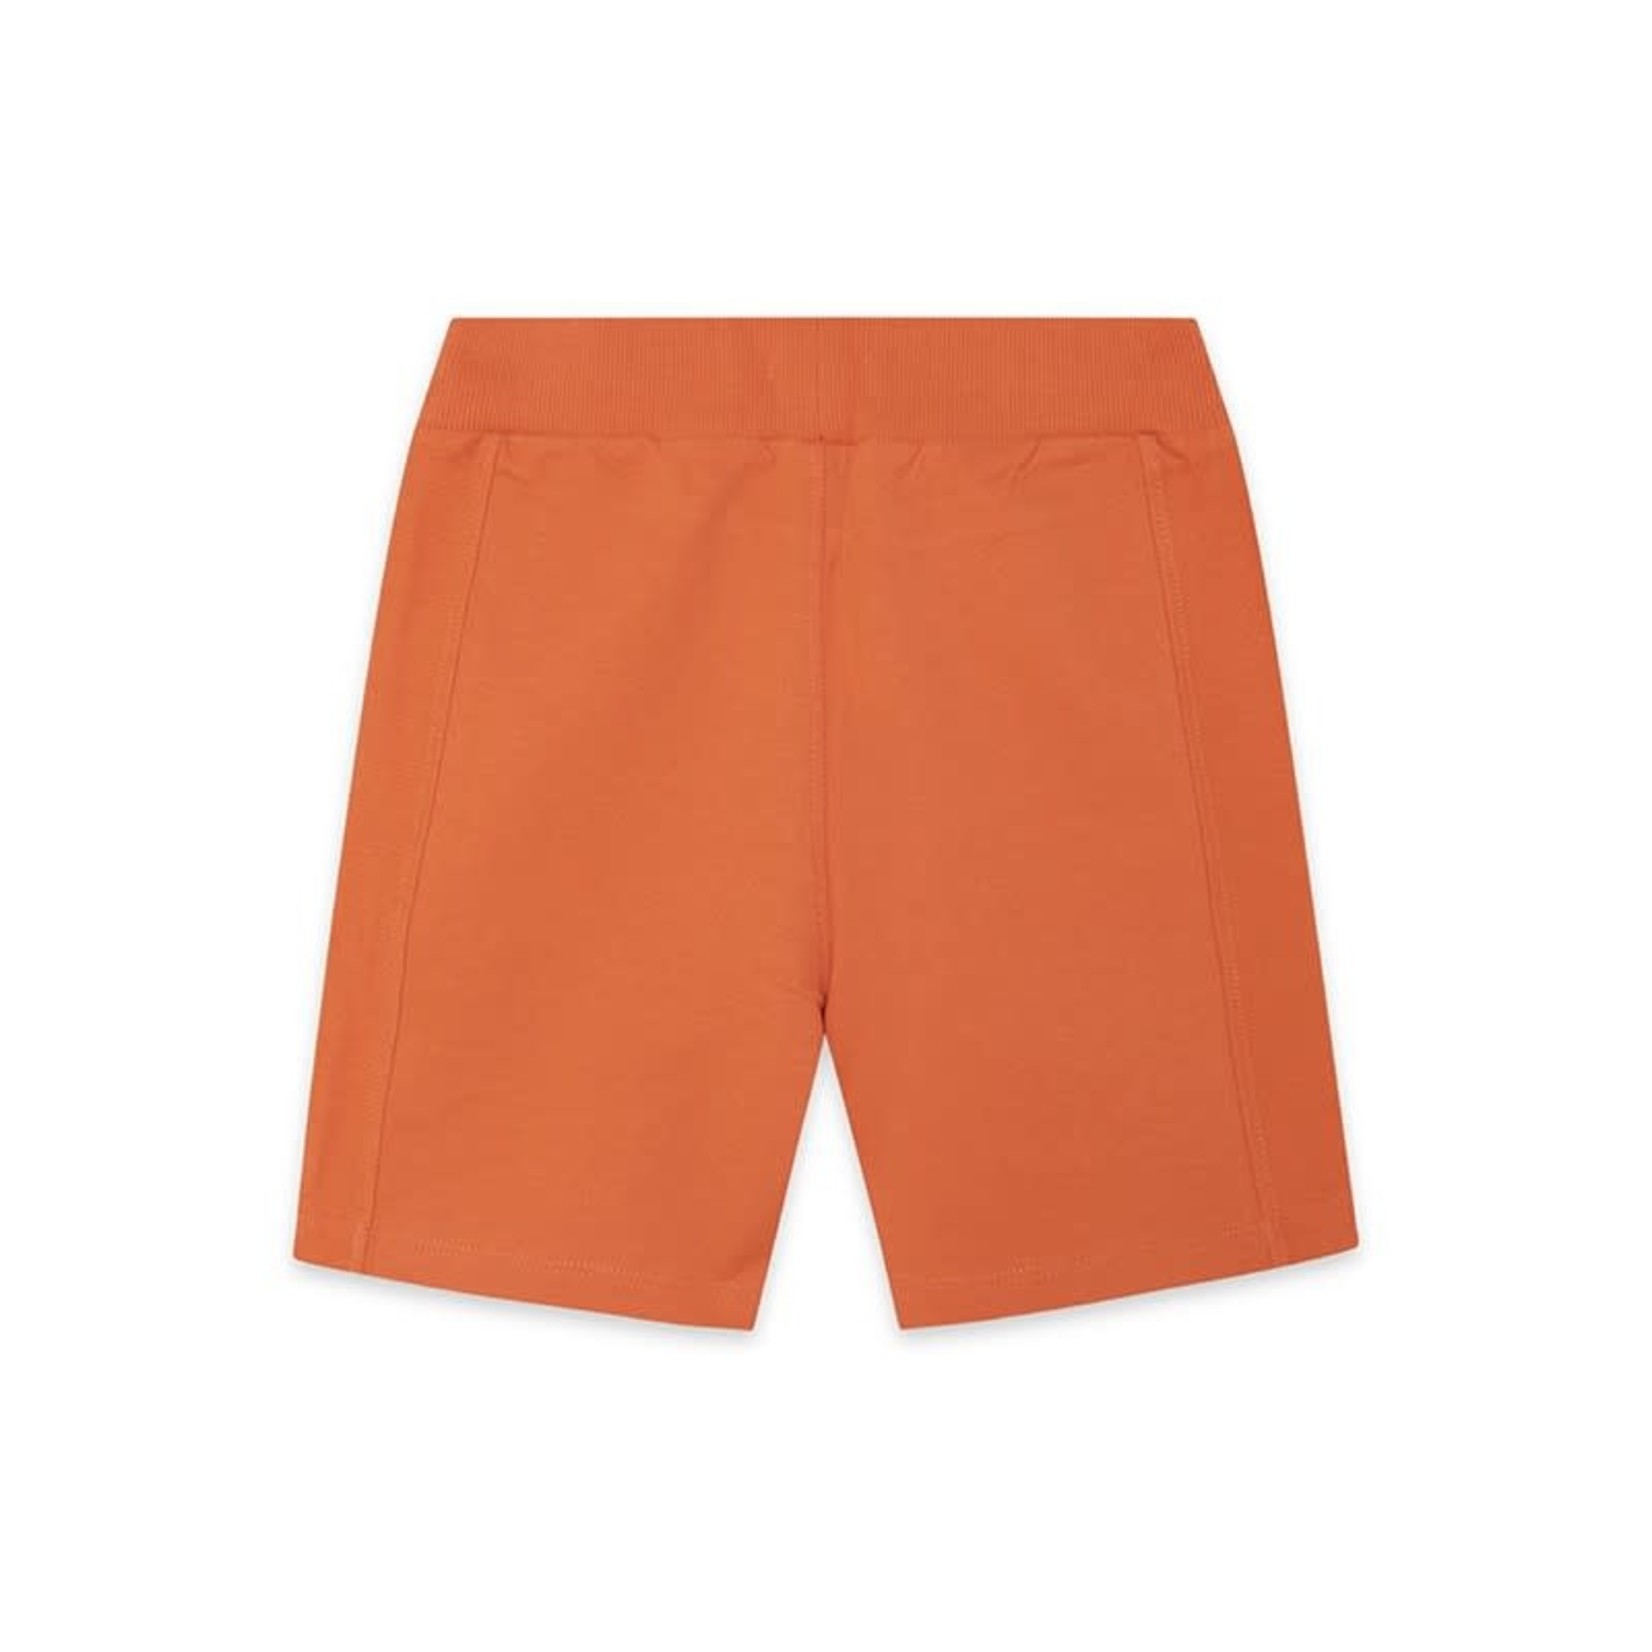 TucTuc TUC TUC - Orange soft cotton shorts 'Loop - Save our species'